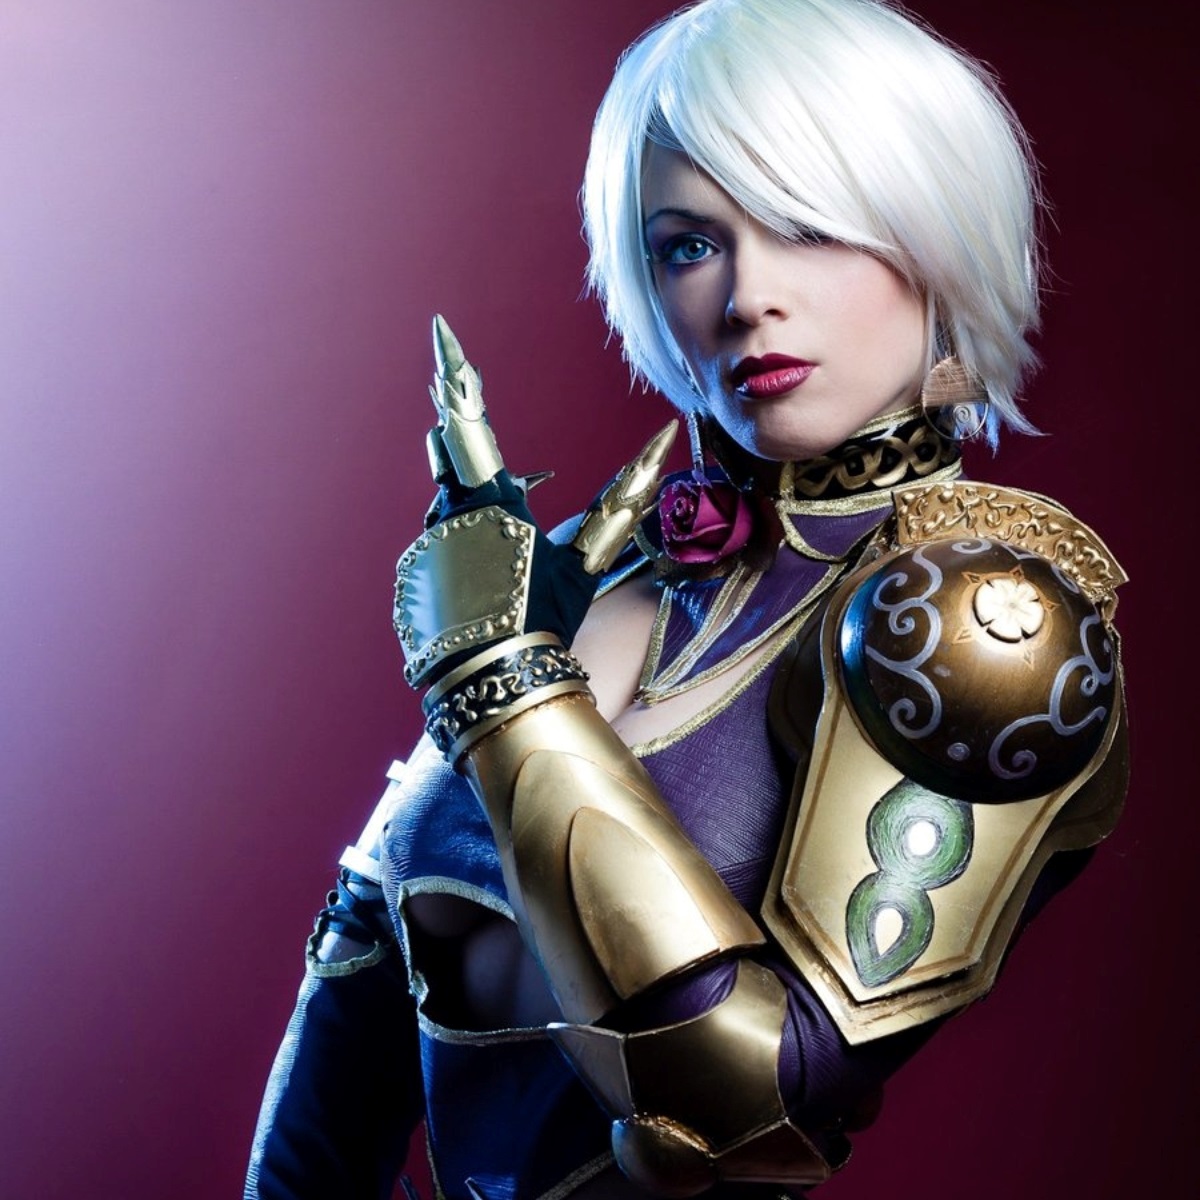 16 Facts About Ivy Valentine (Soulcalibur) - Facts.net